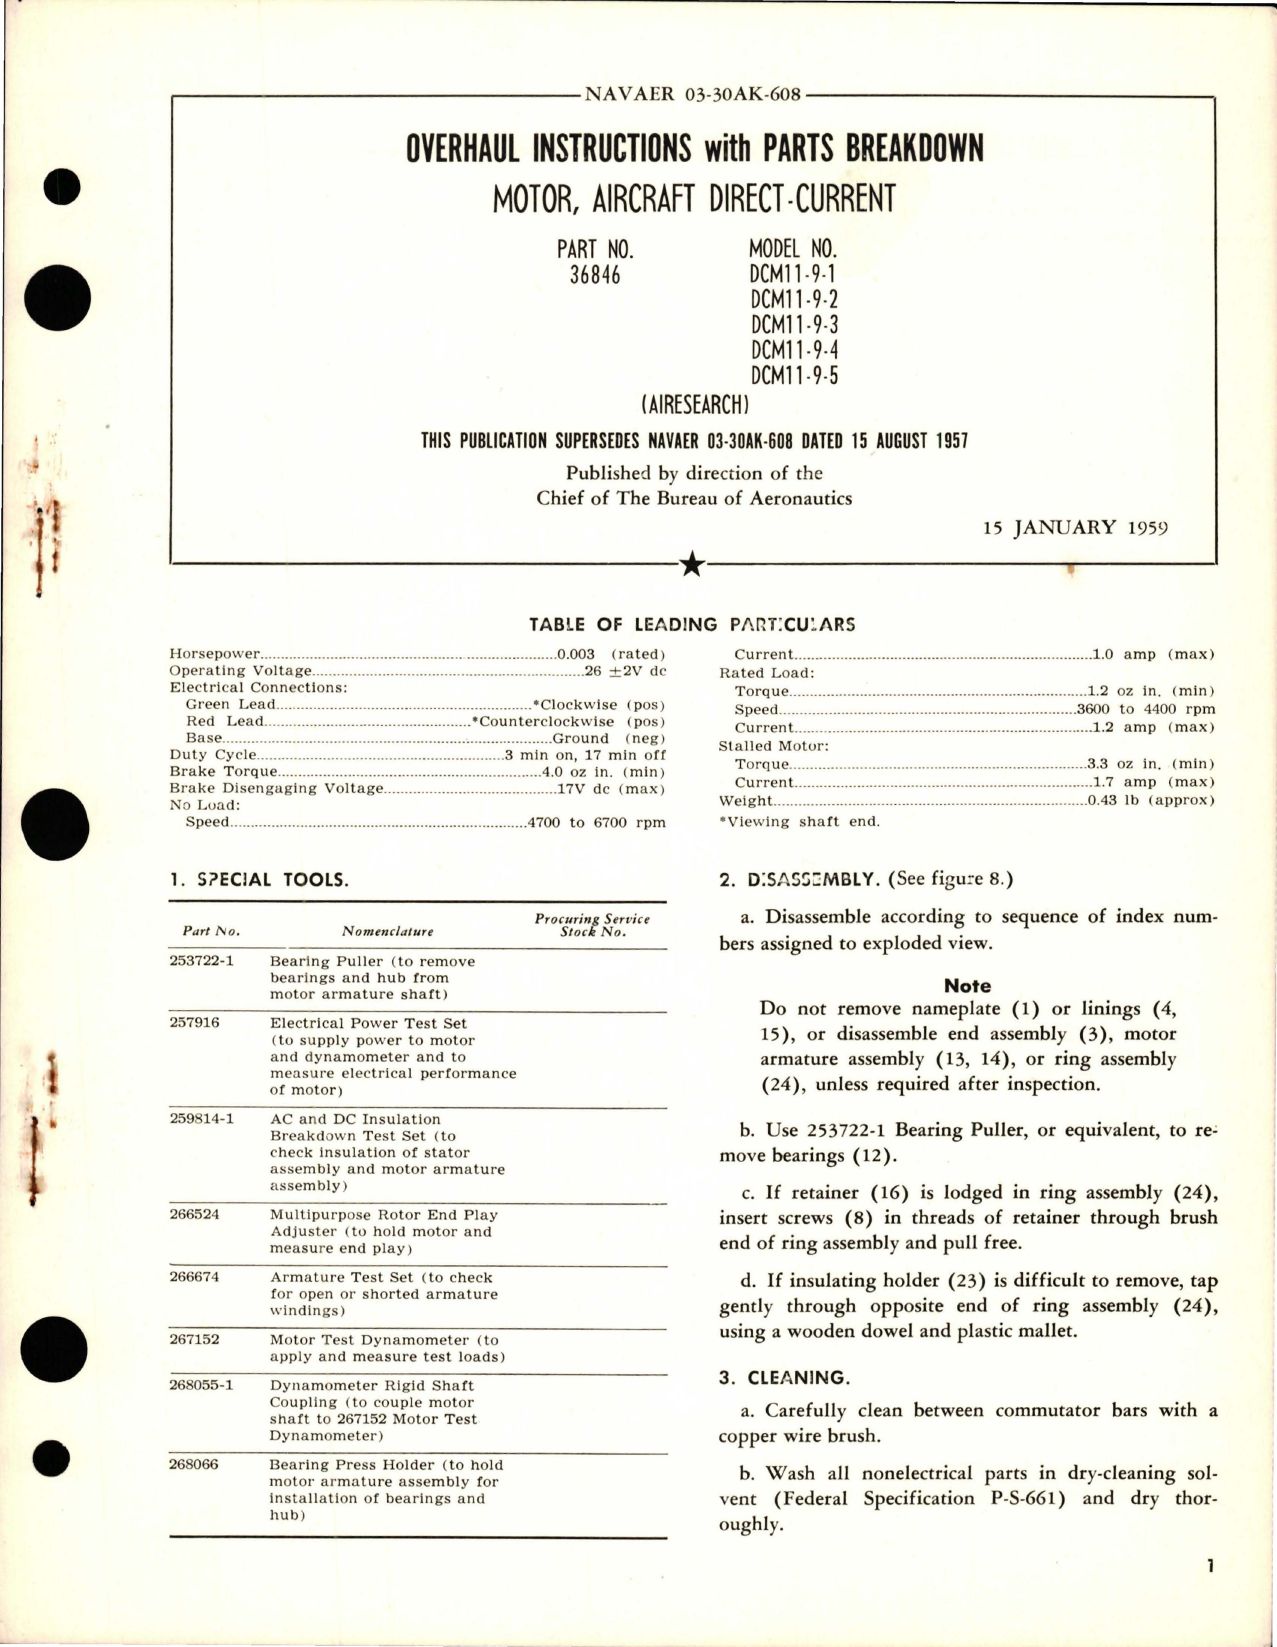 Sample page 1 from AirCorps Library document: Overhaul Instructions with Parts Breakdown for Direct-Current Motor - Part 36846 